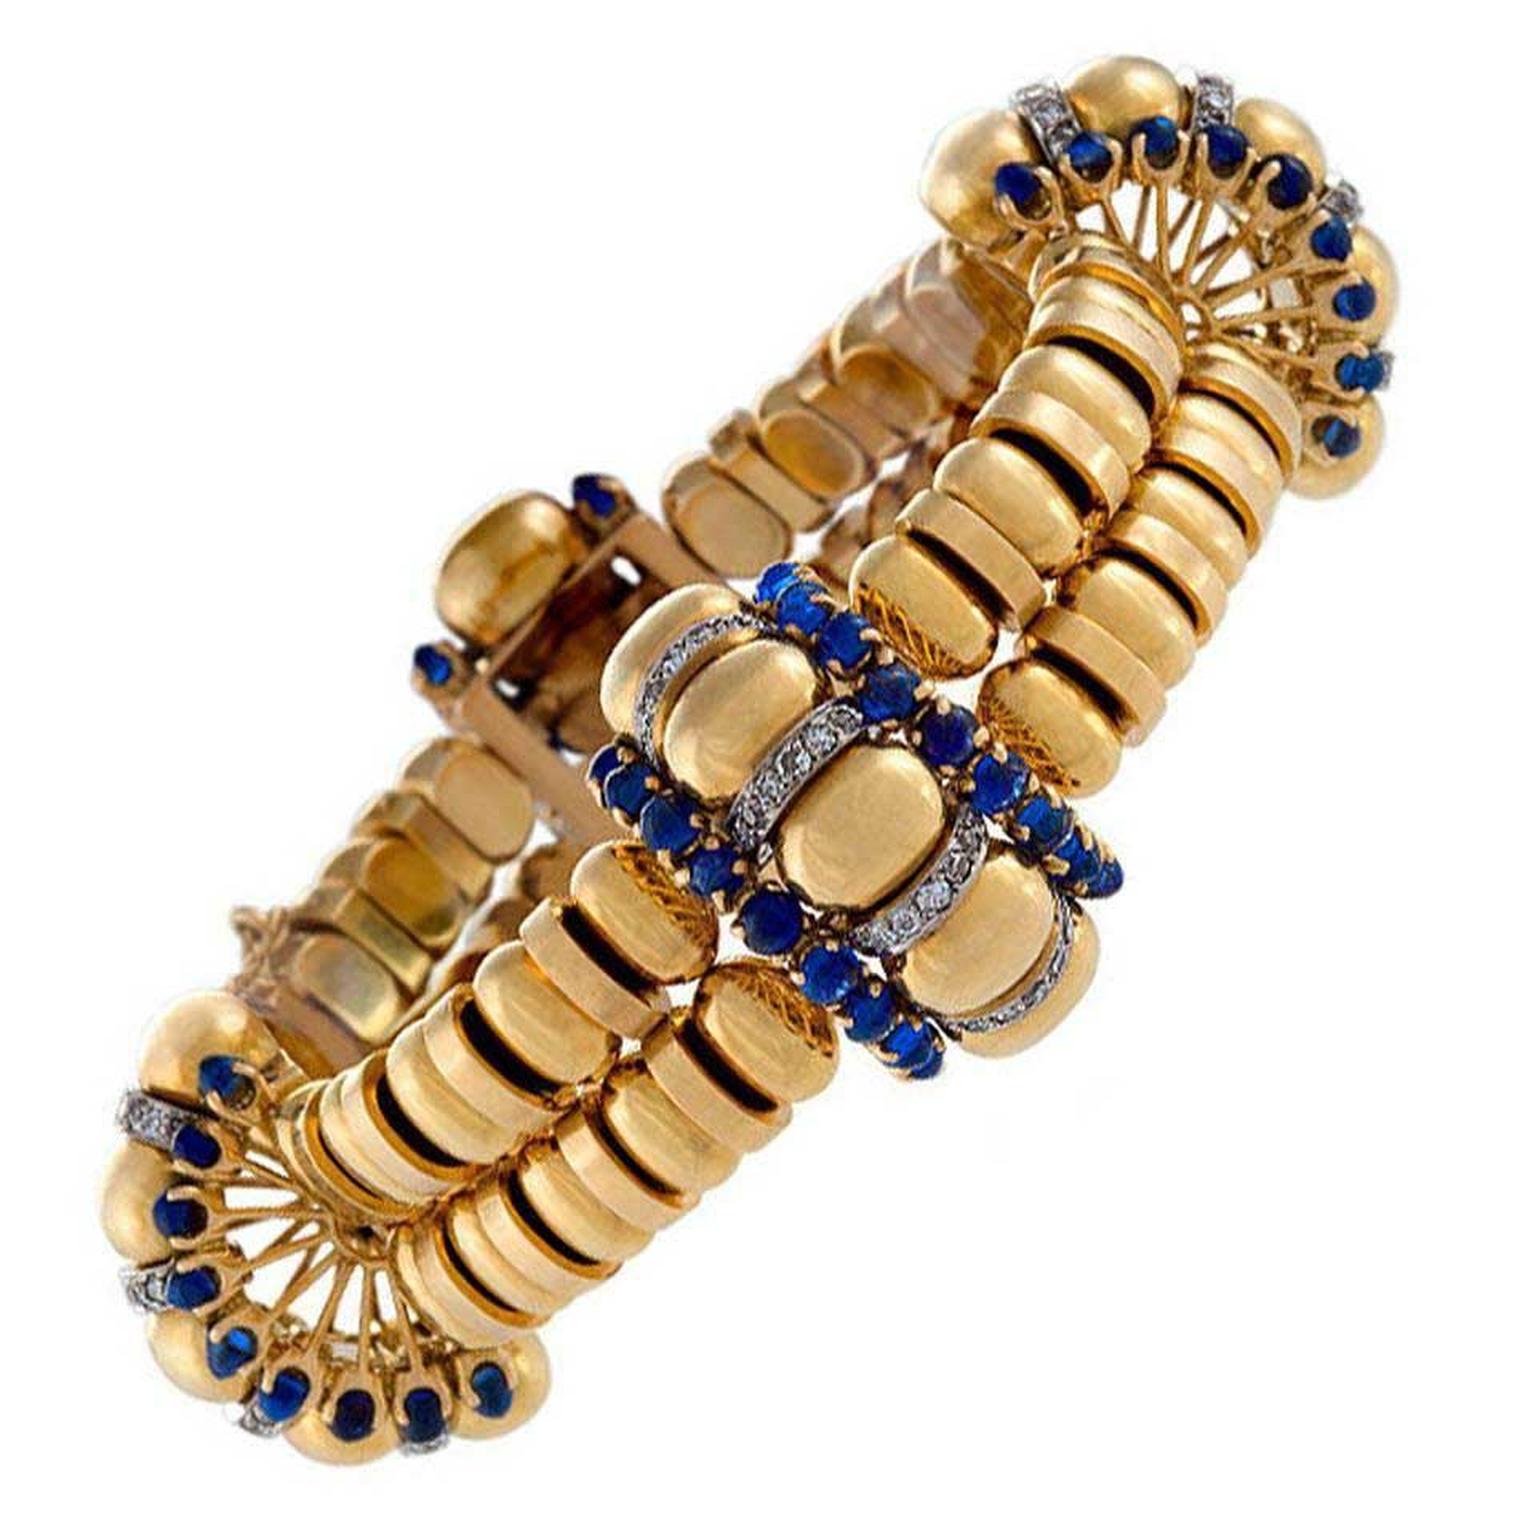 Macklowe Gallery French Retro 18K gold bracelet with blue sapphires and diamonds by Boucheron